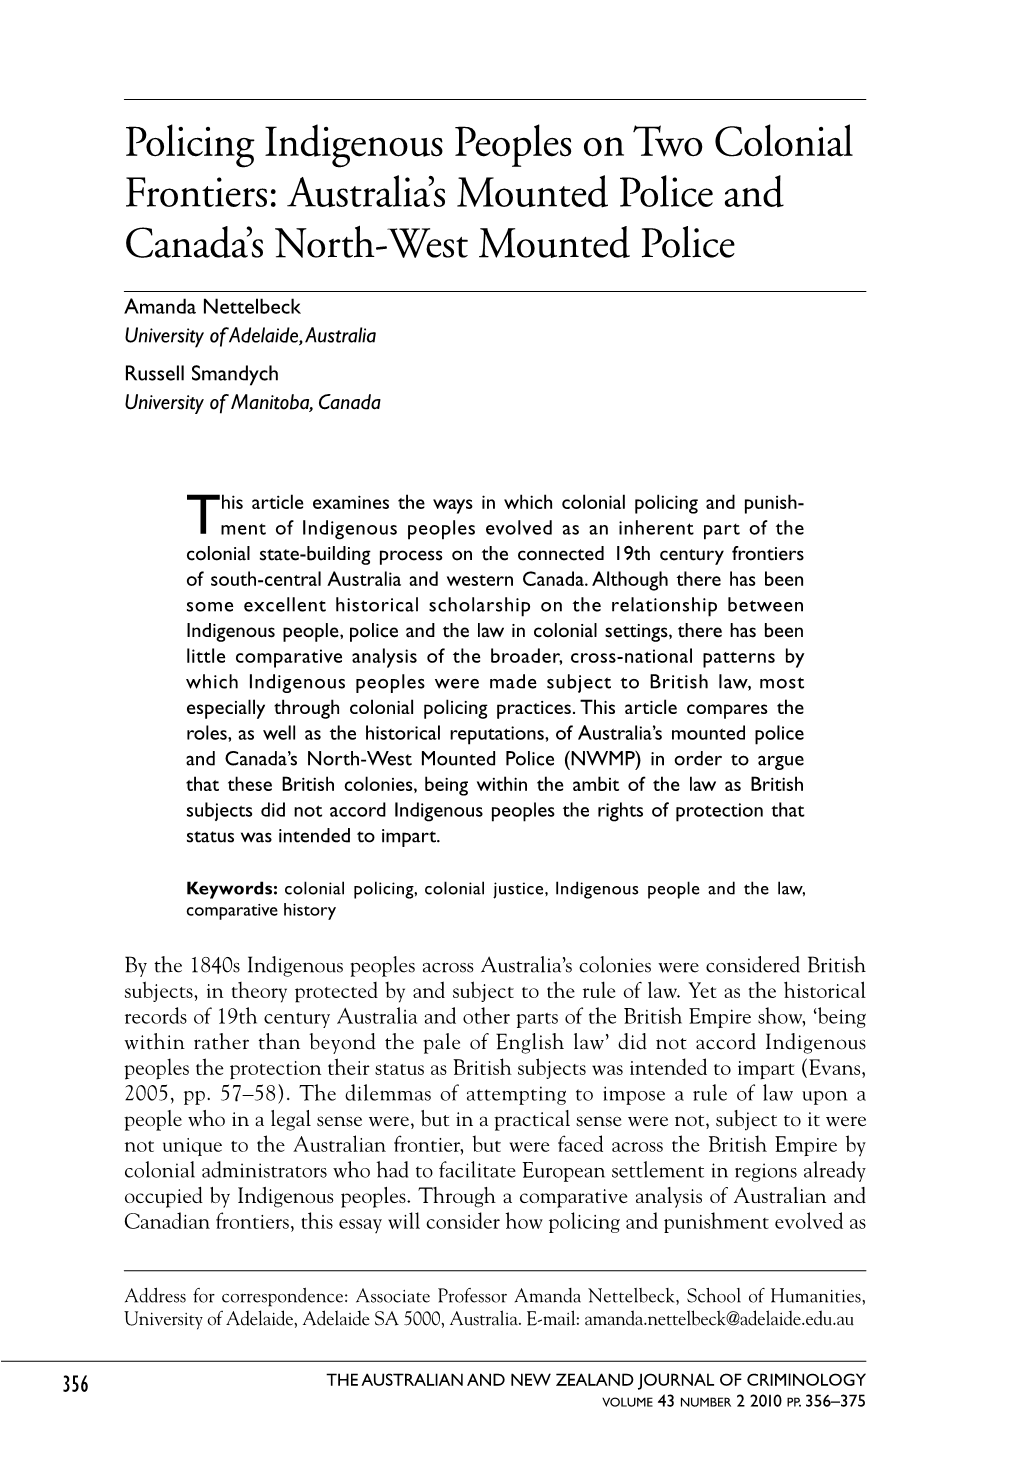 Policing Indigenous Peoples on Two Colonial Frontiers: Australia’S Mounted Police and Canada’S North-West Mounted Police